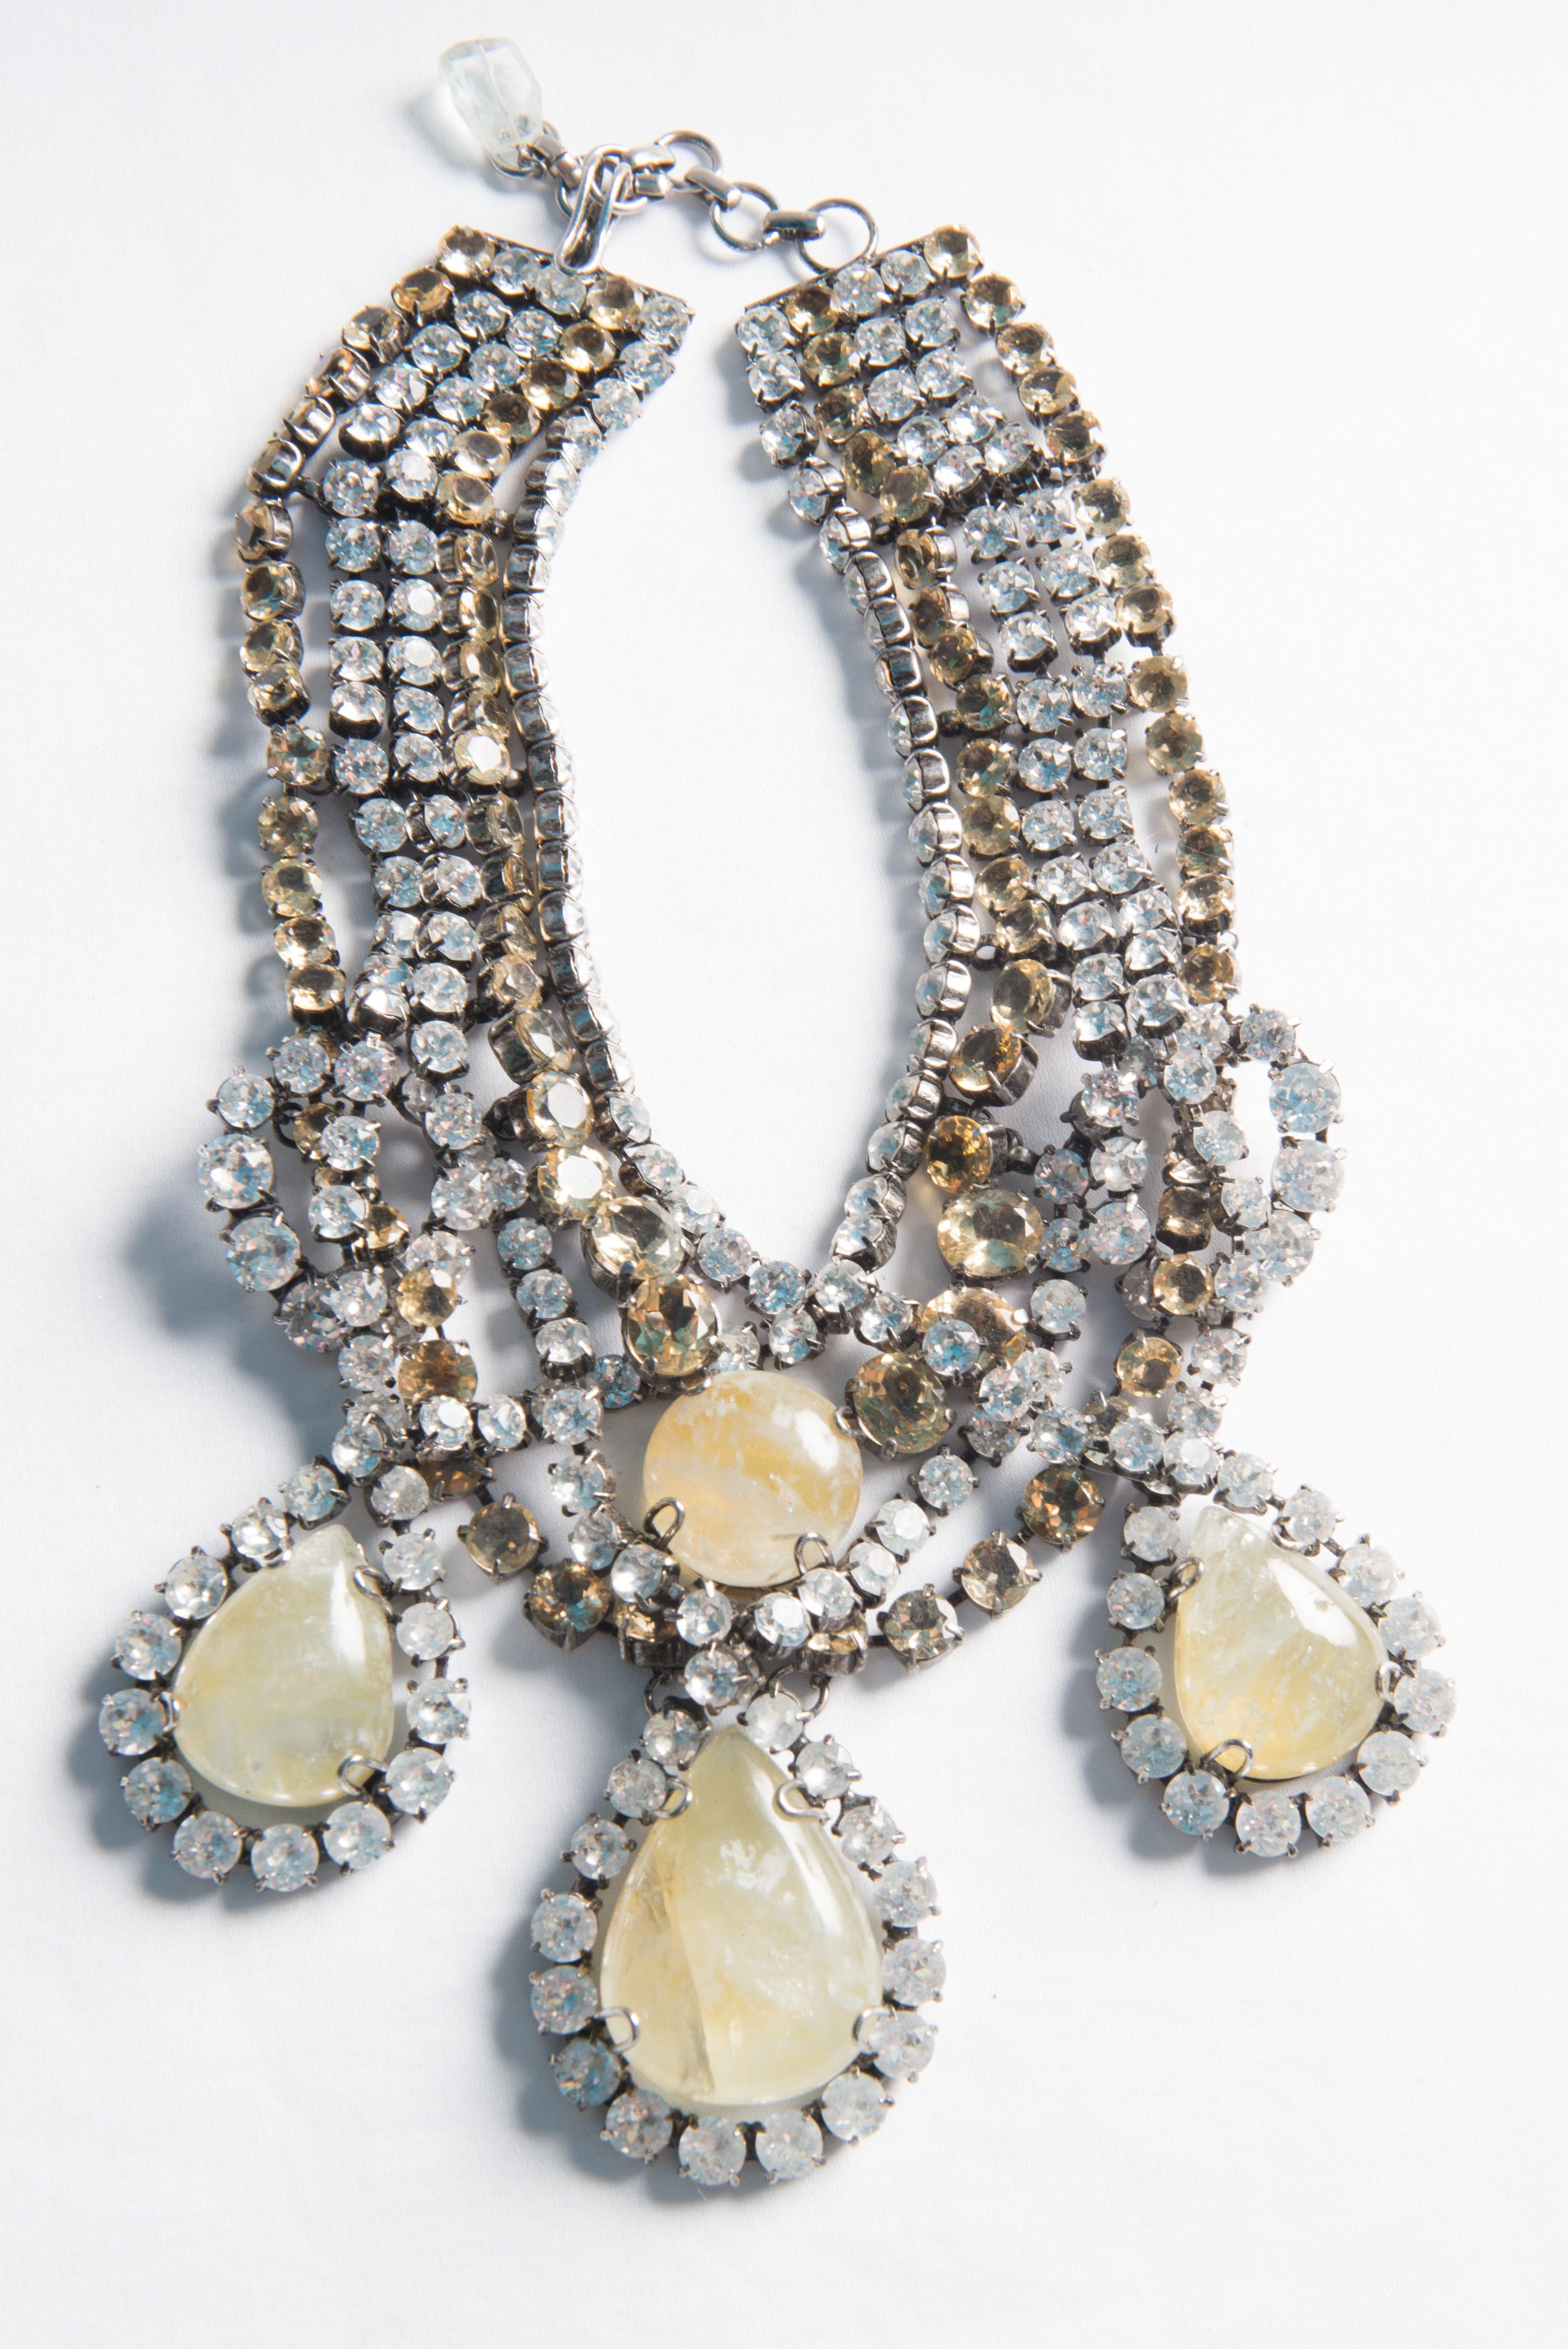 Brilliant Cut Iradj Moini Gemstone Crystal Necklace and Earring Set For Sale